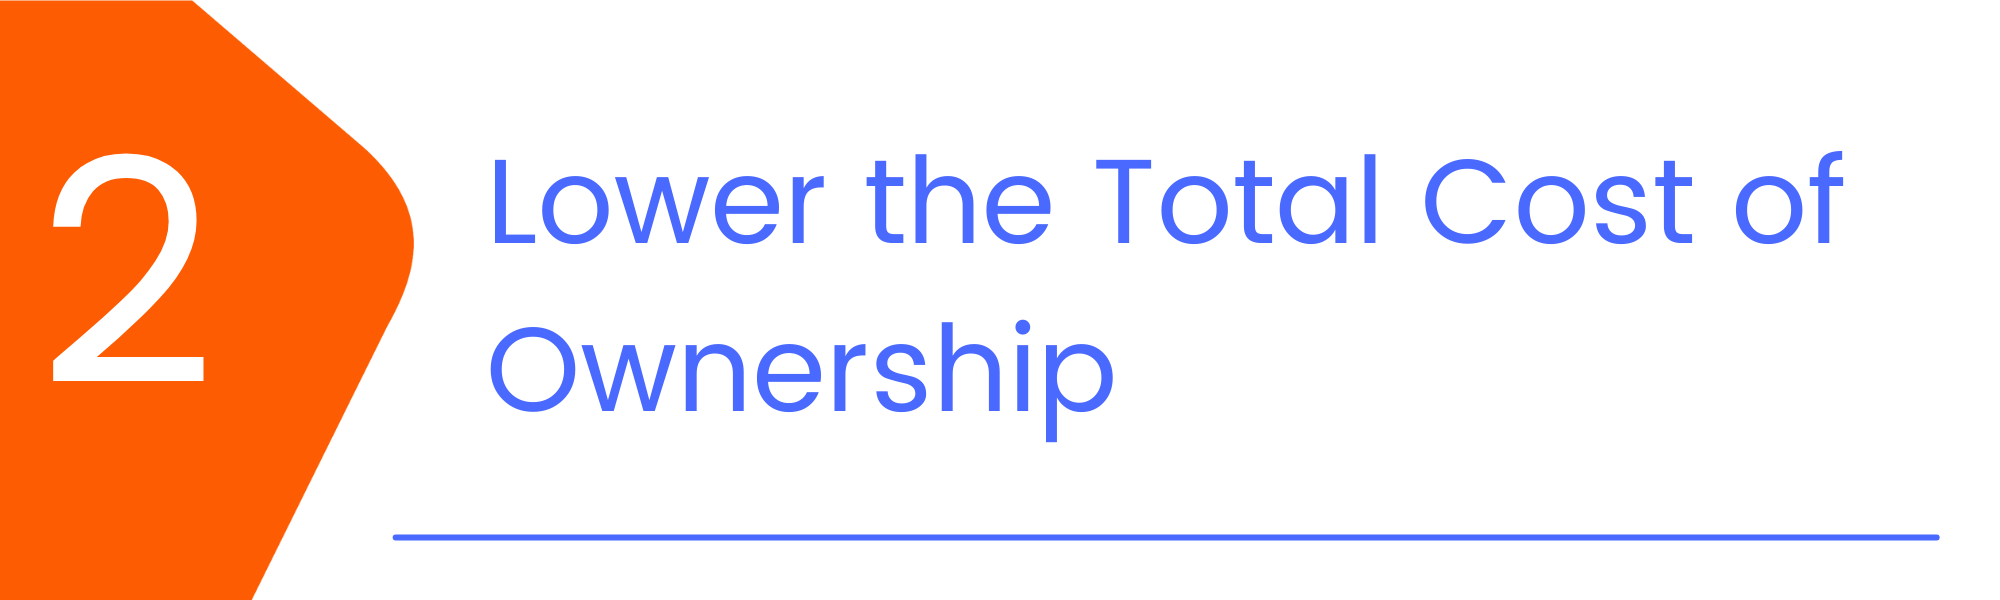 Lower-the-Total-Cost-of-Ownership